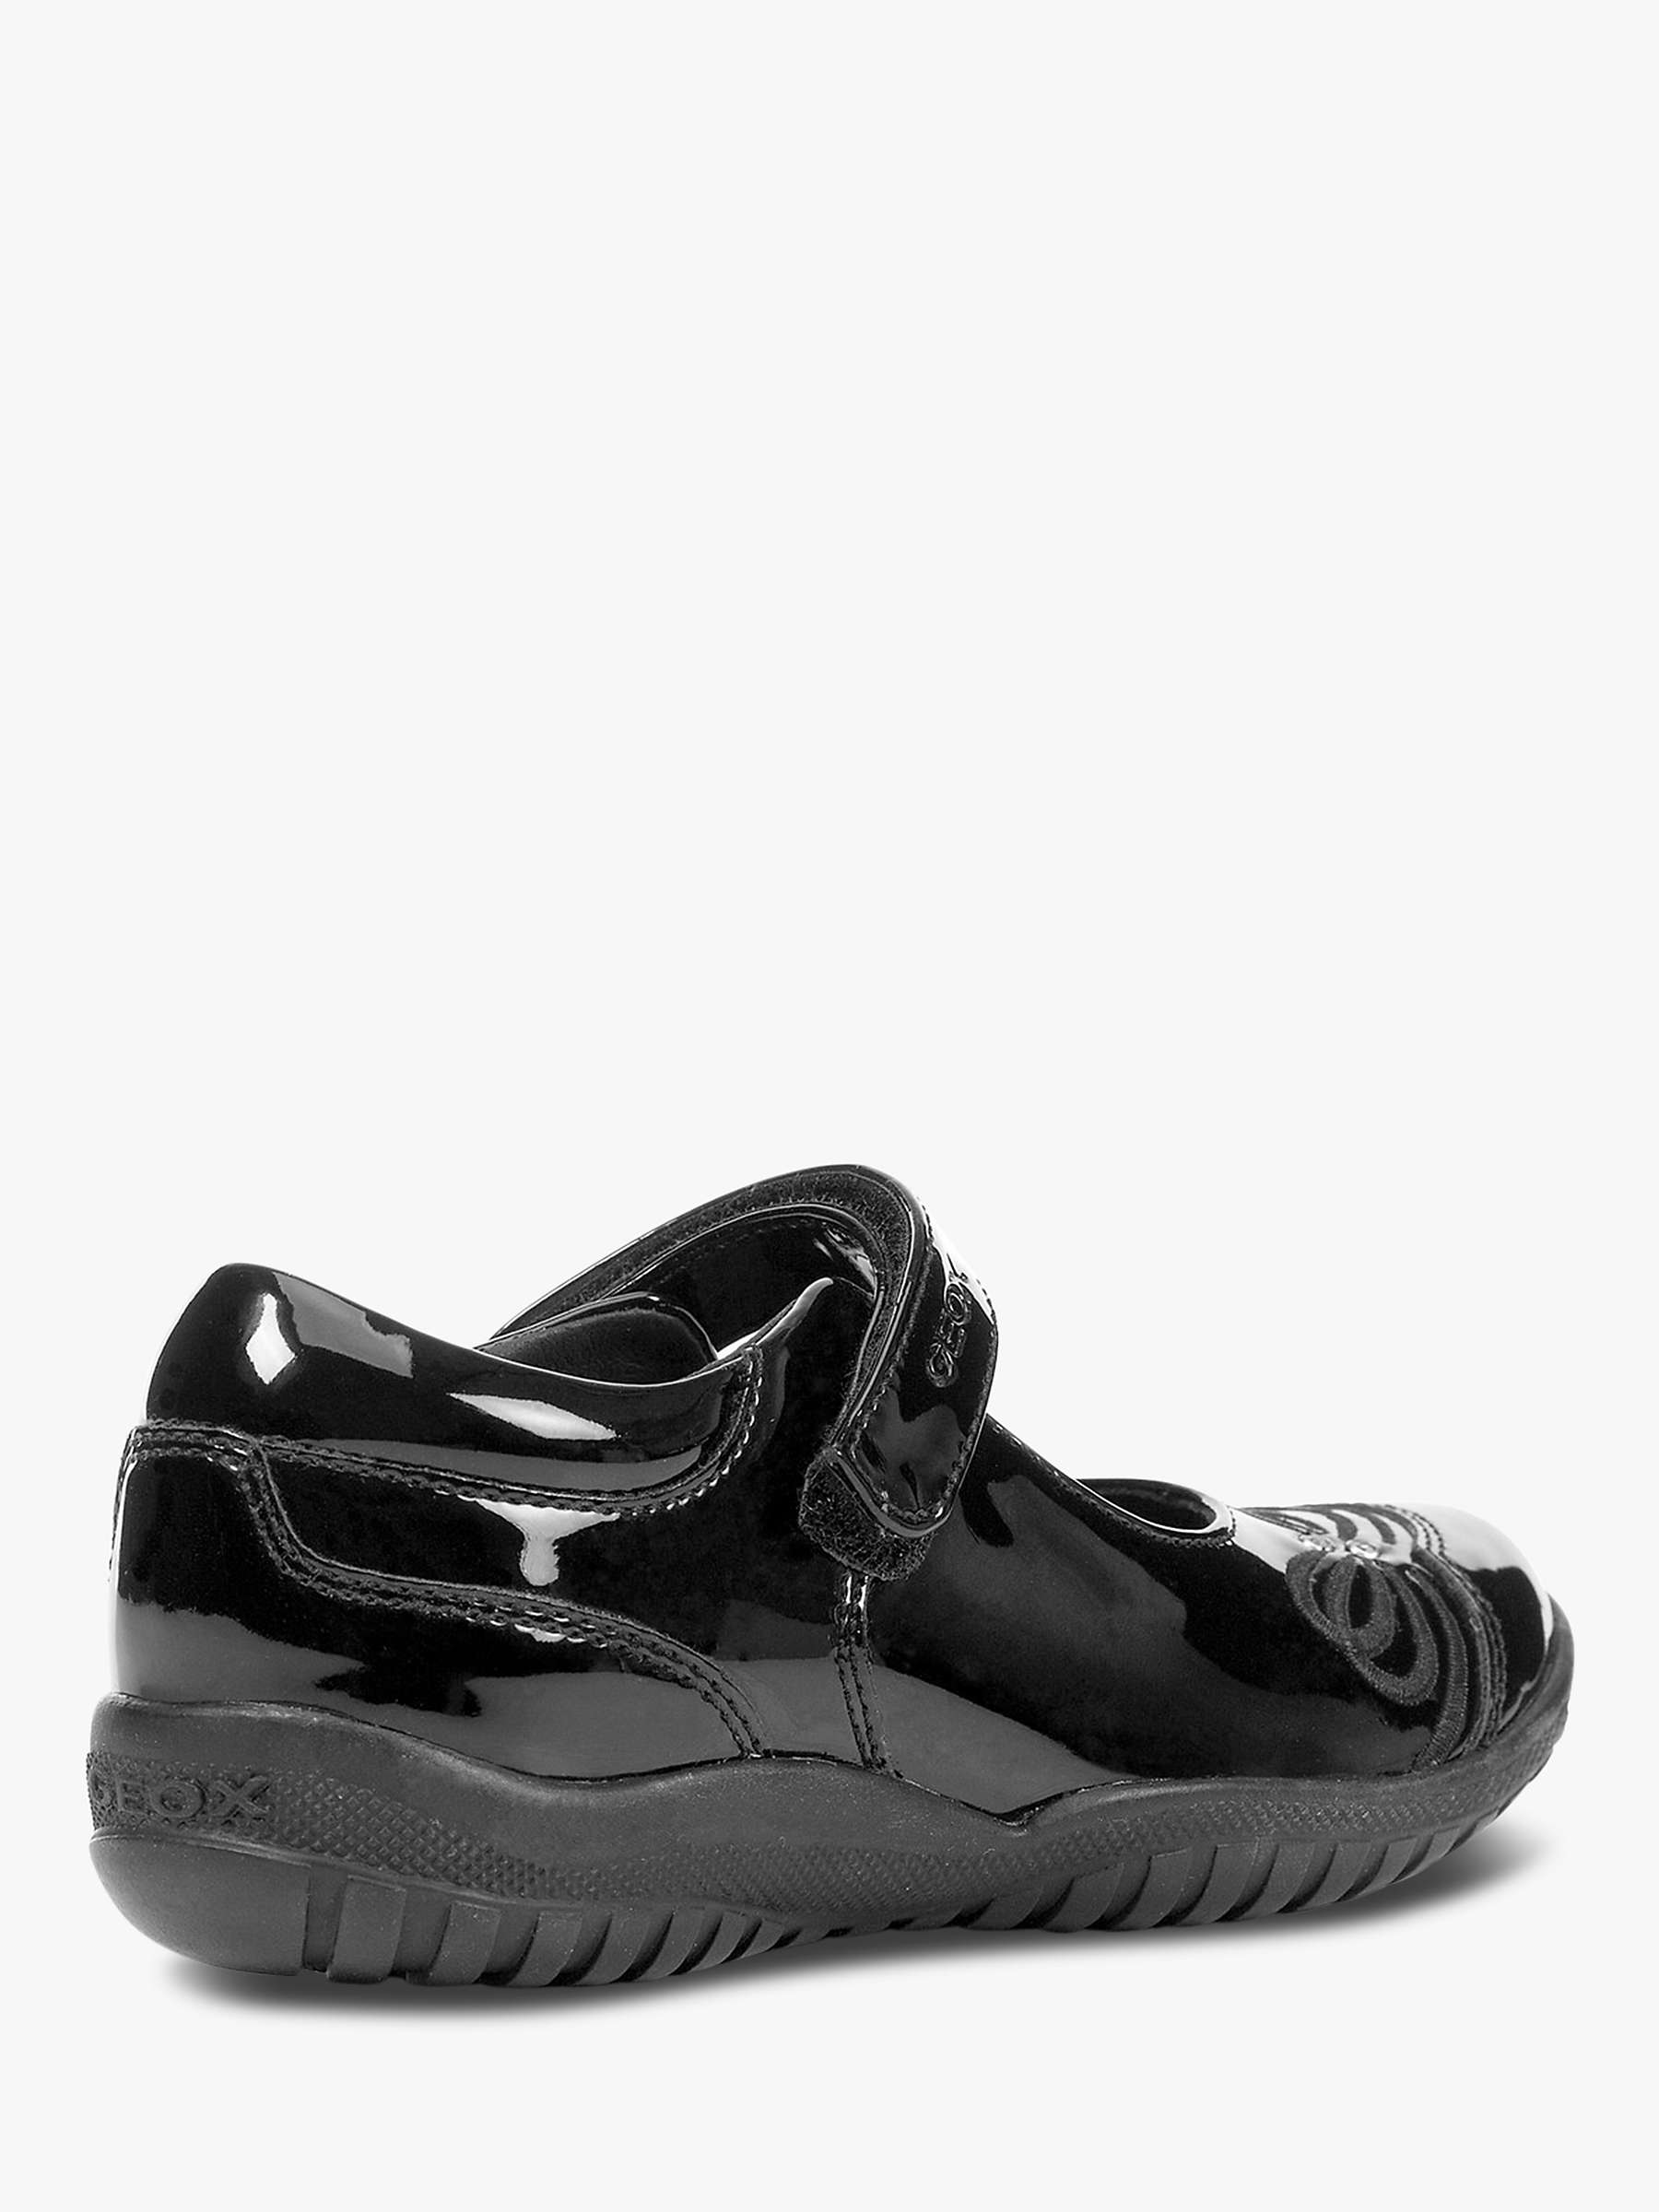 Buy Geox Children's Shadow Mary Jane School Shoes, Black Patent Online at johnlewis.com